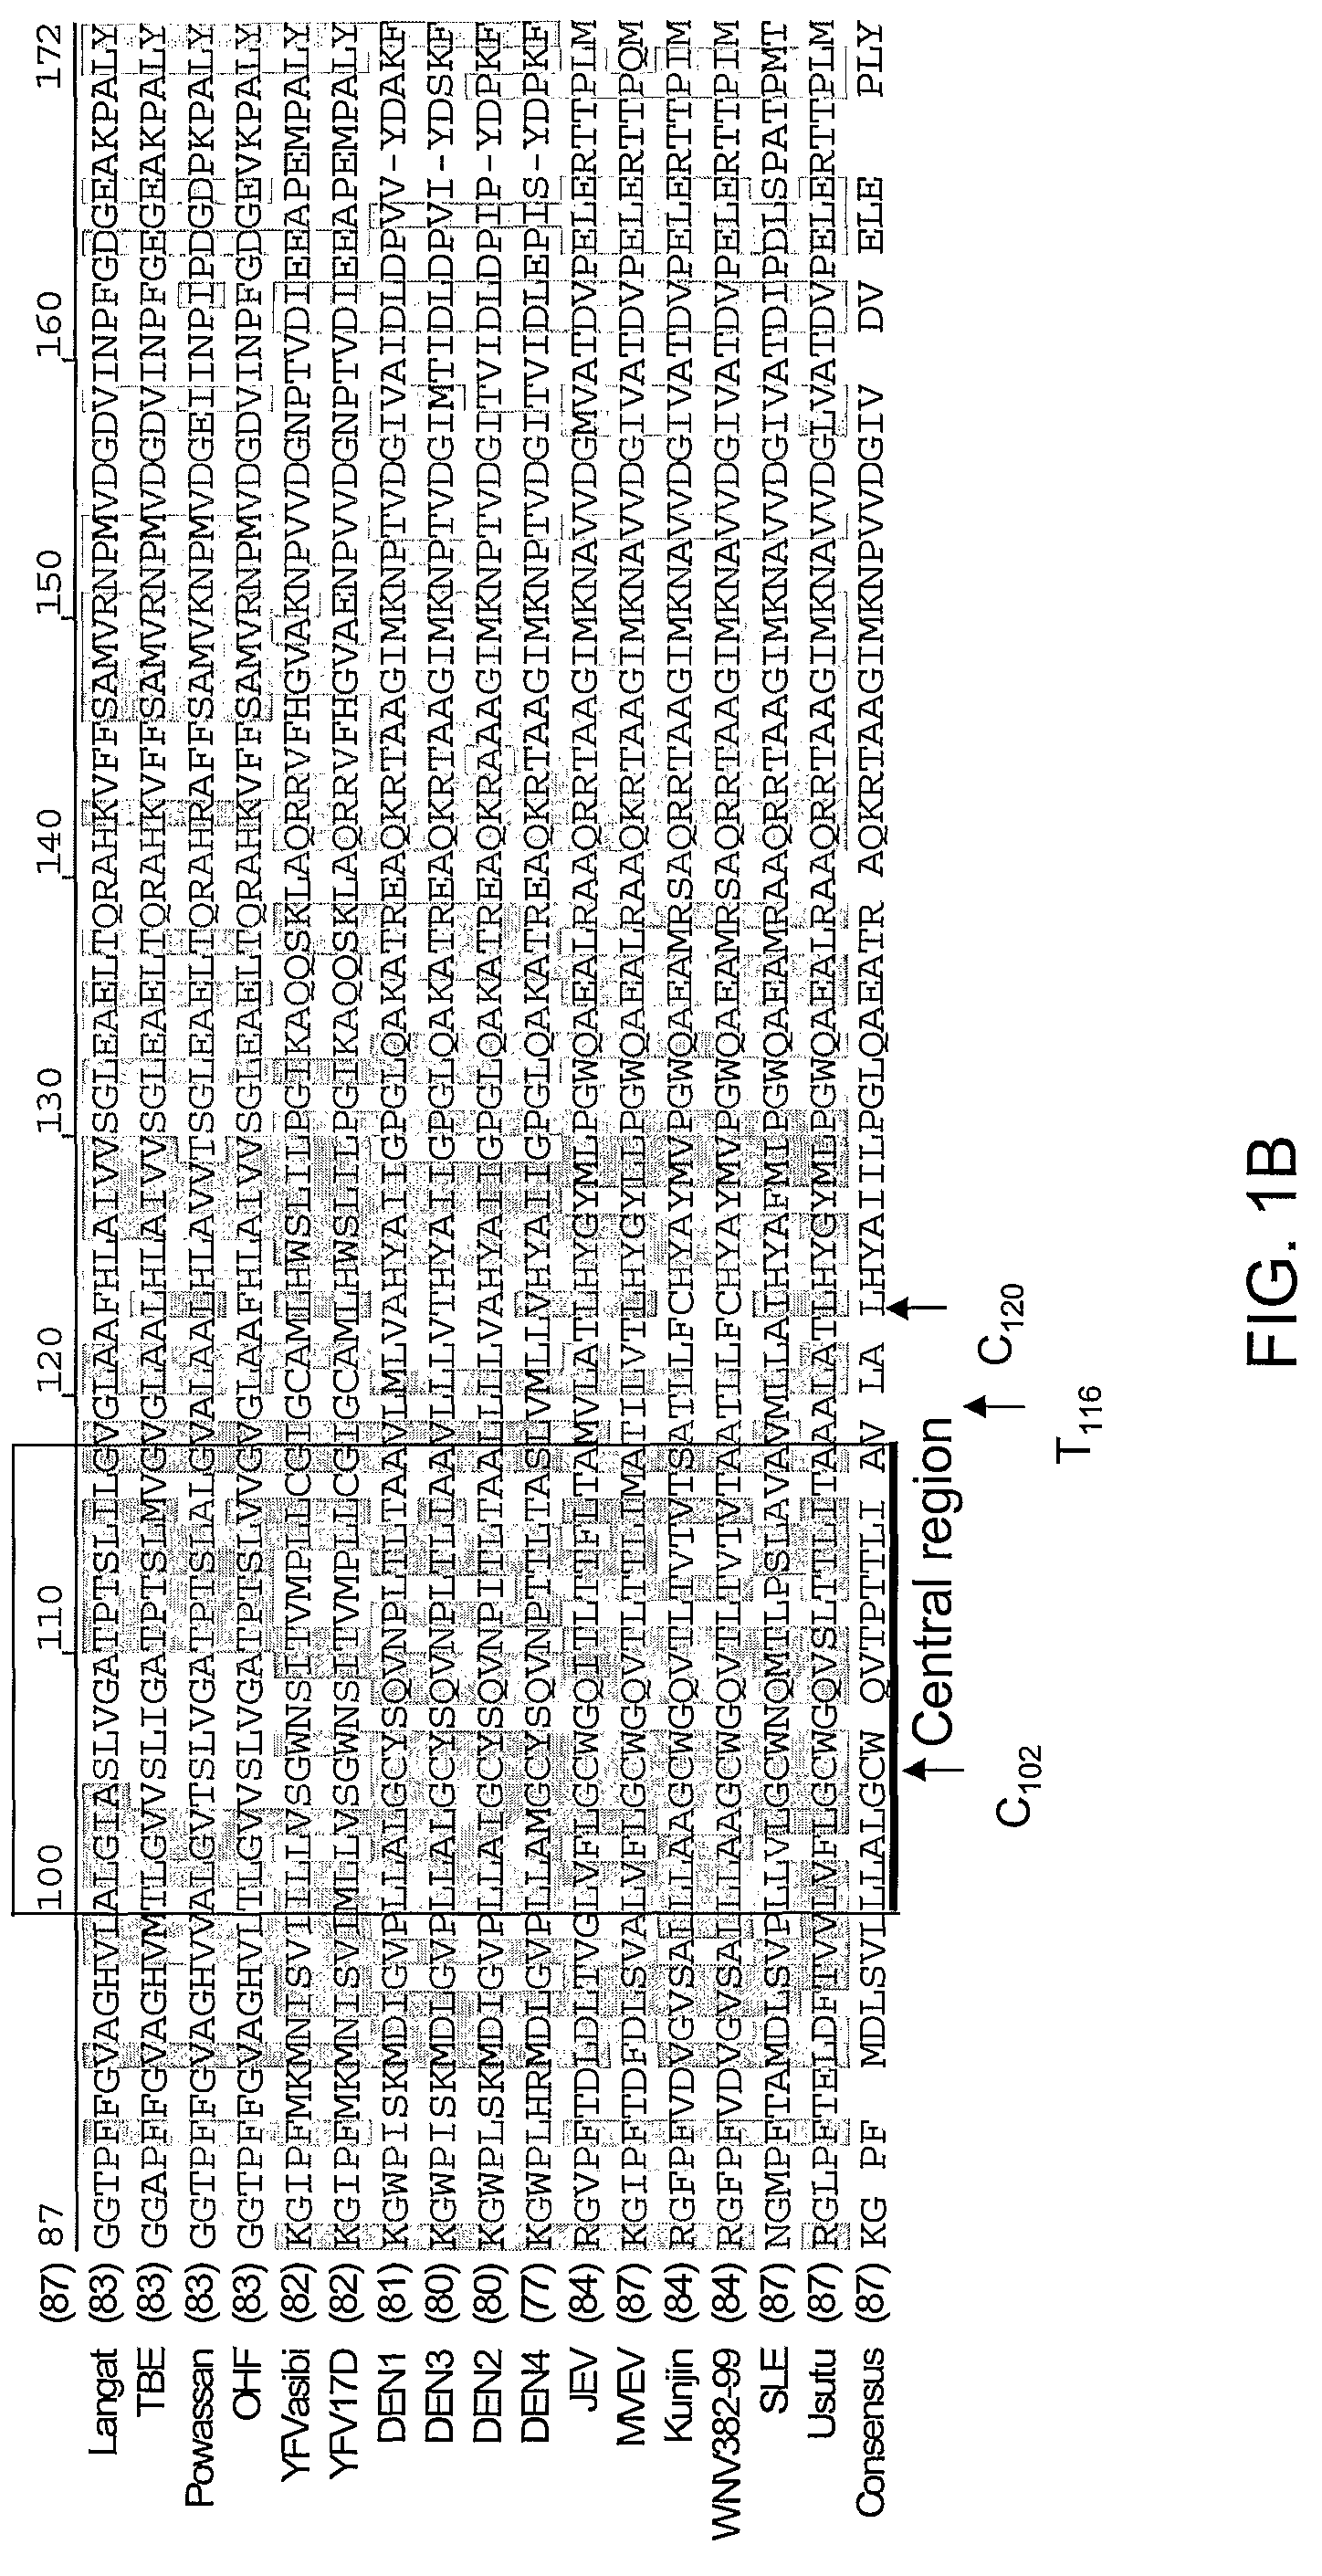 Attenuated virus strains and uses thereof